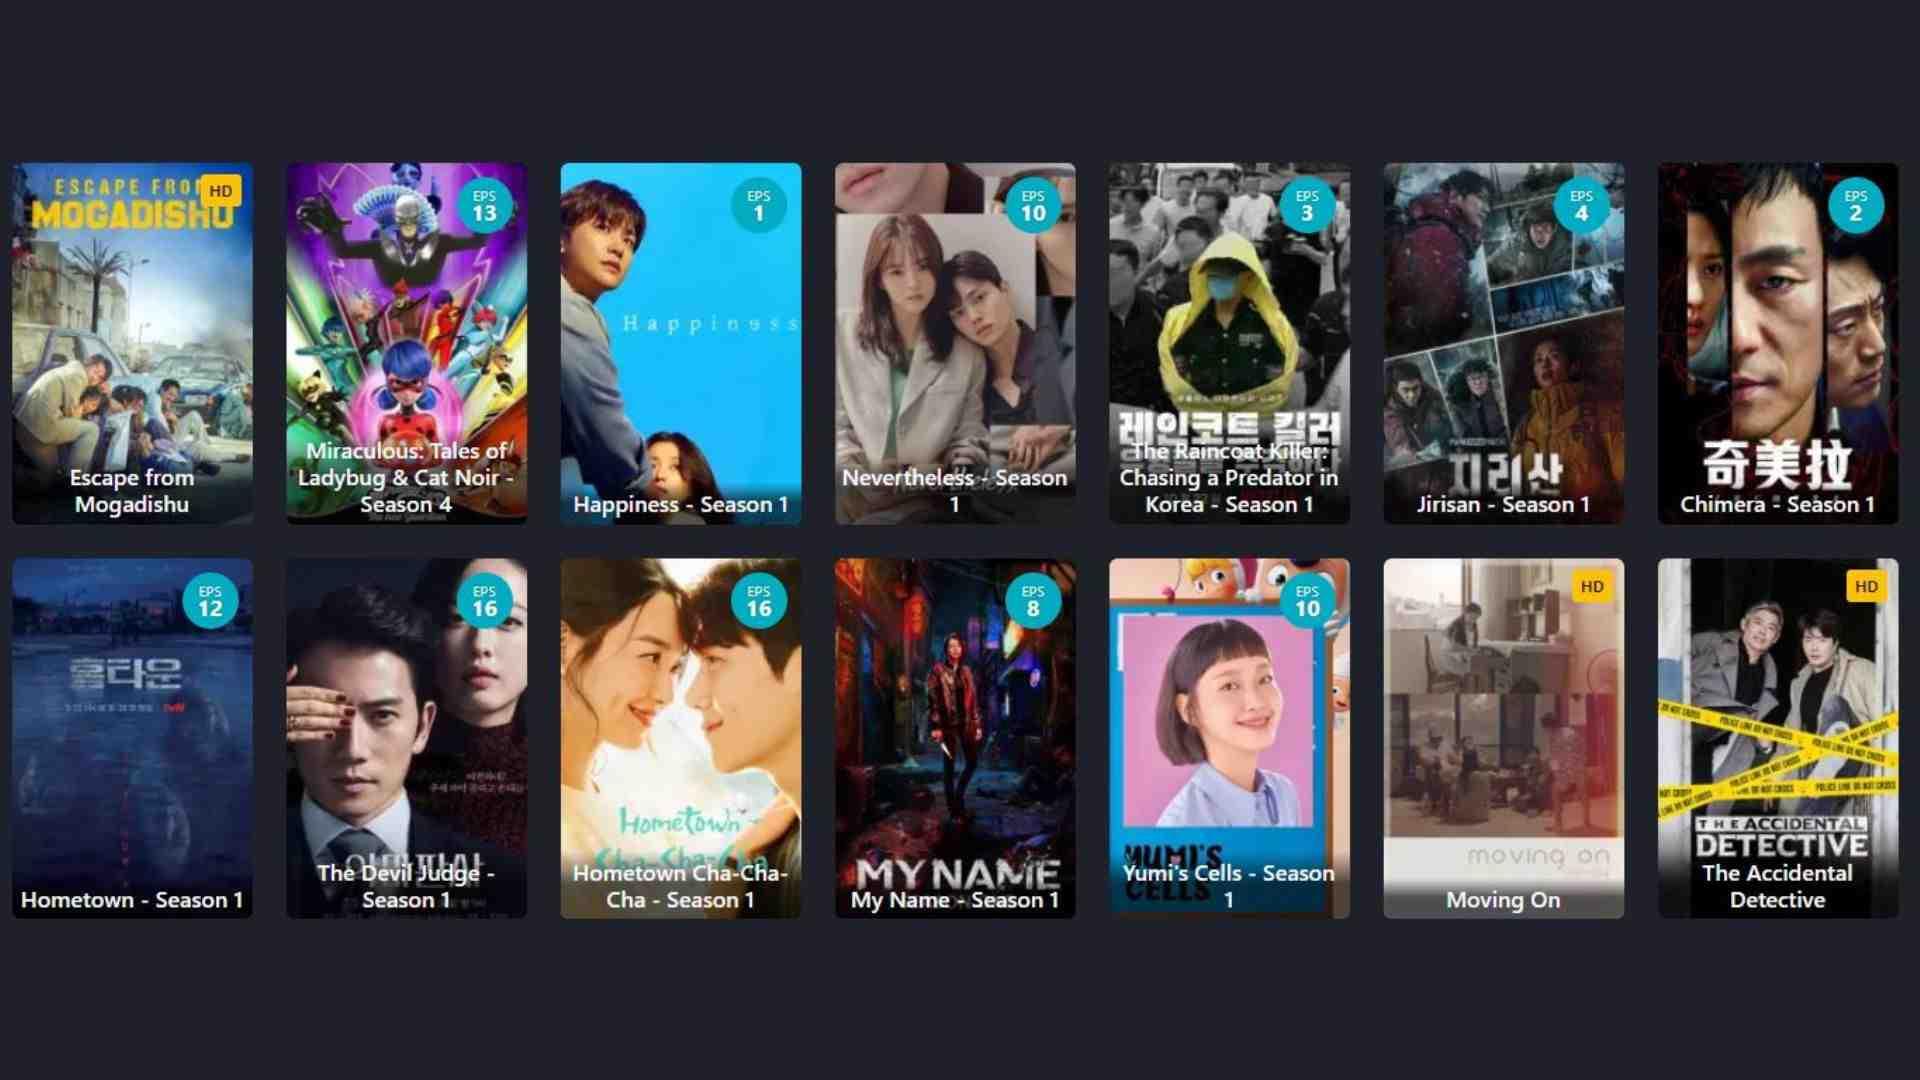 South Korean Movies and TV Shows Available on FMovies